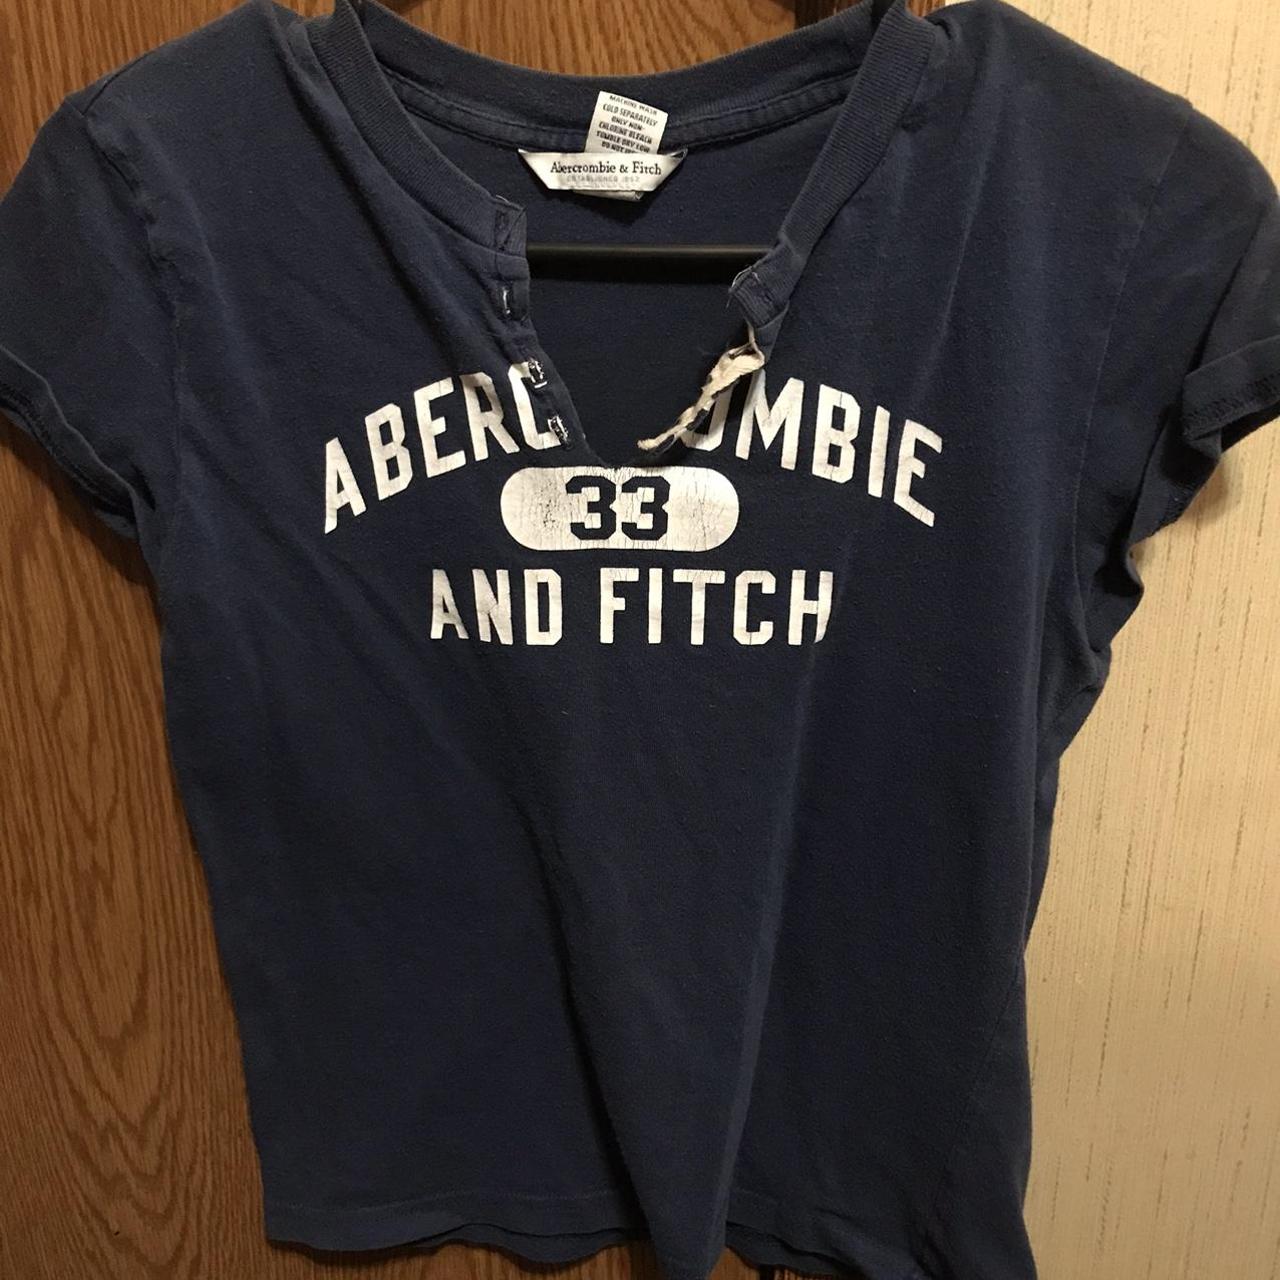 Abercrombie & Fitch Women's Navy and White Shirt | Depop